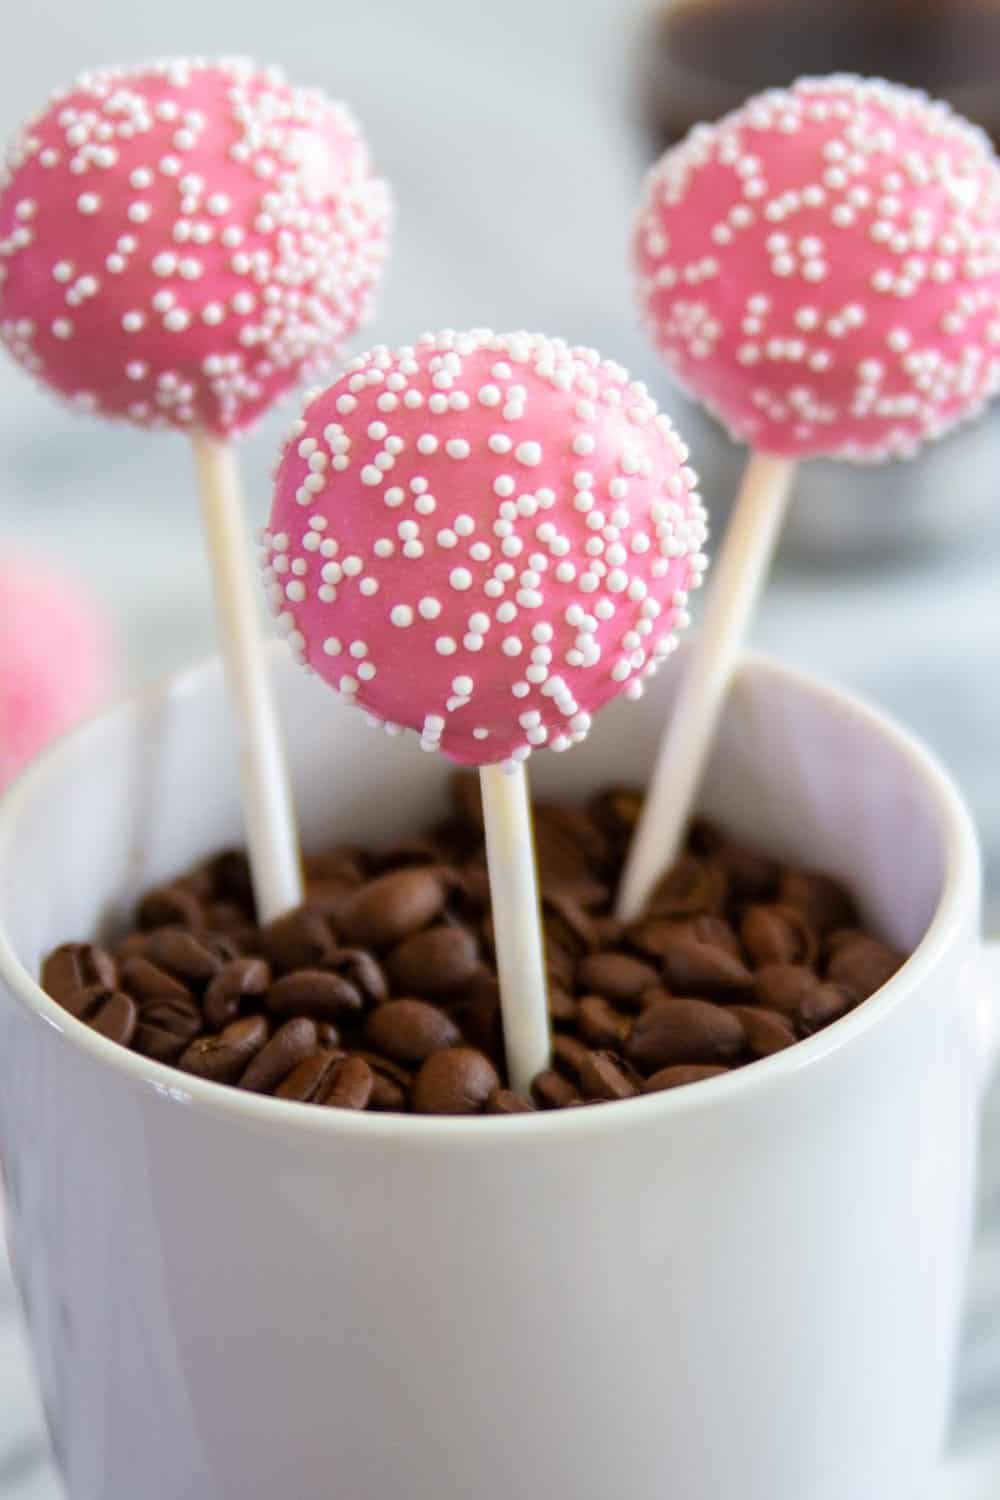 How To Make Cake Pops At Home Video